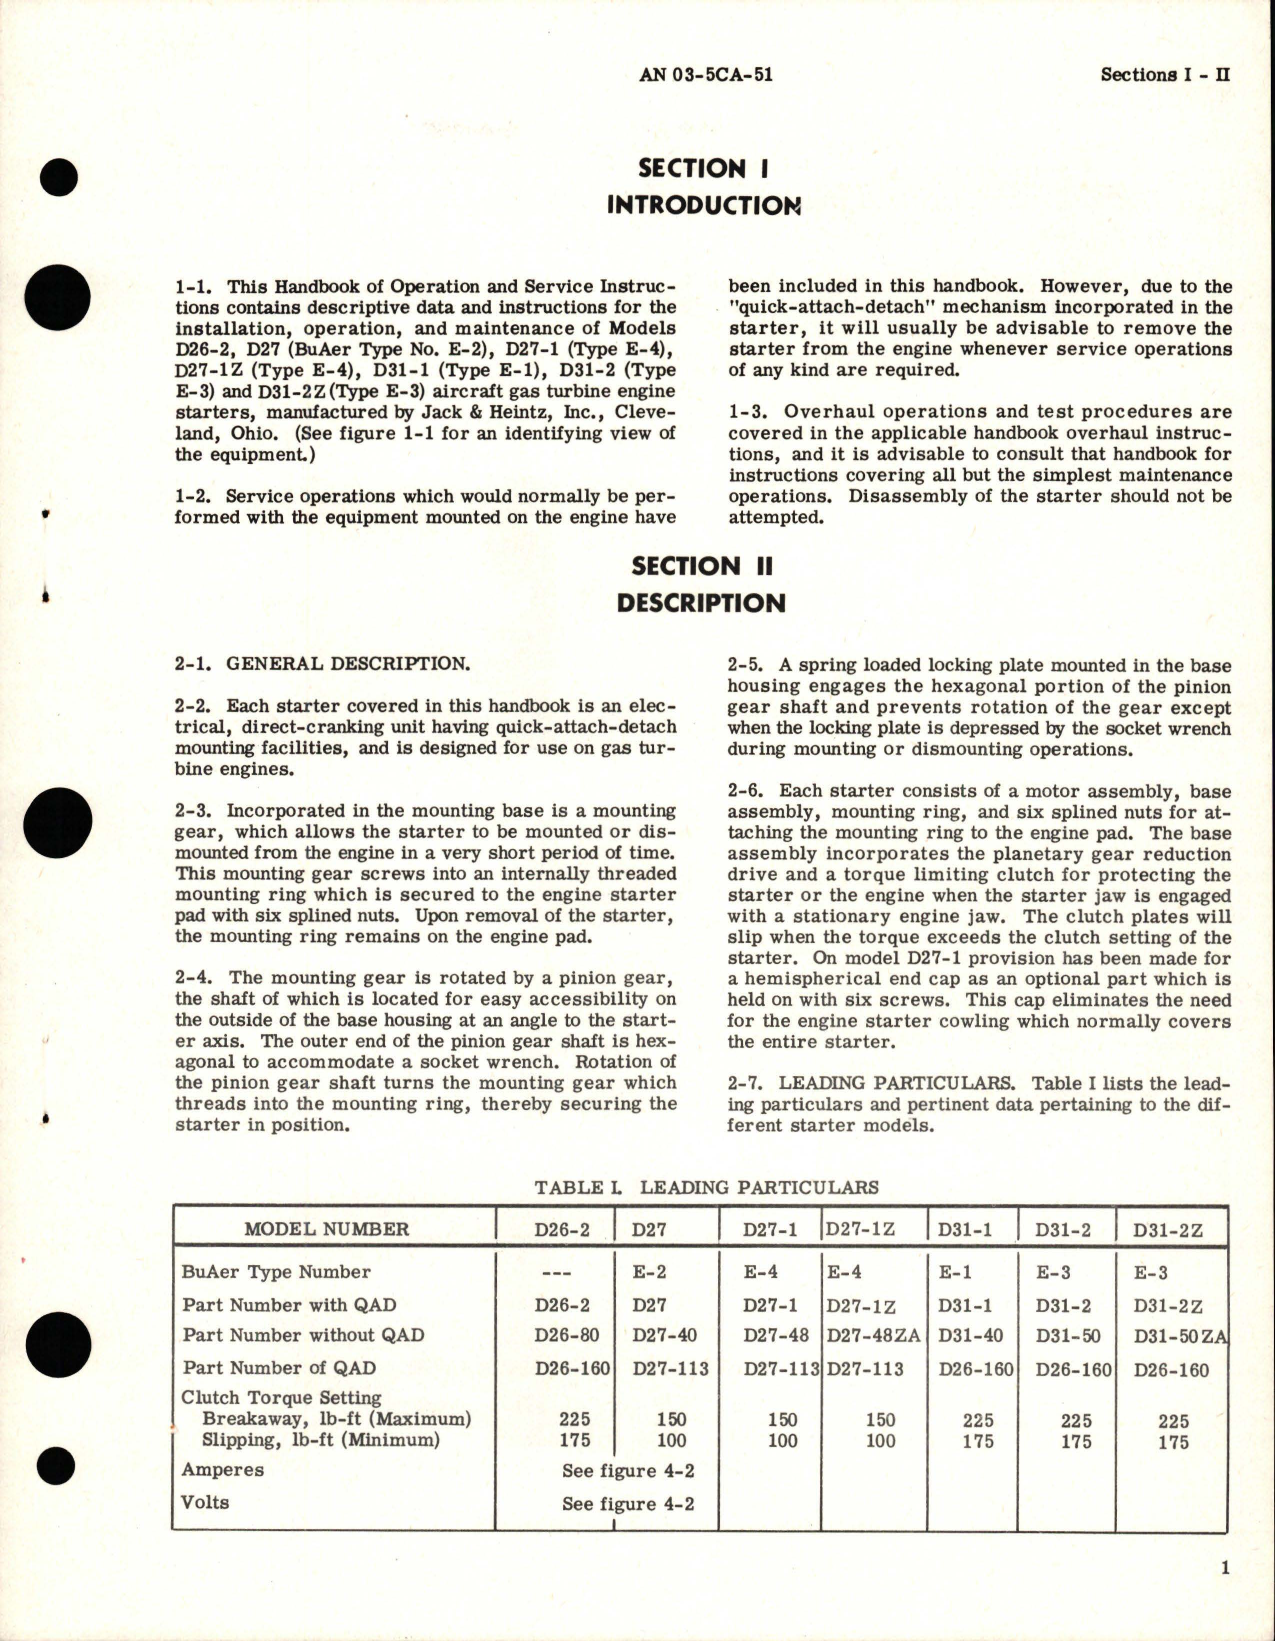 Sample page 5 from AirCorps Library document: Operation and Service Instructions for Electric Starters - D26-2, D27, D27-1, D27-1Z, D31-1, D31-2, D31-2Z 